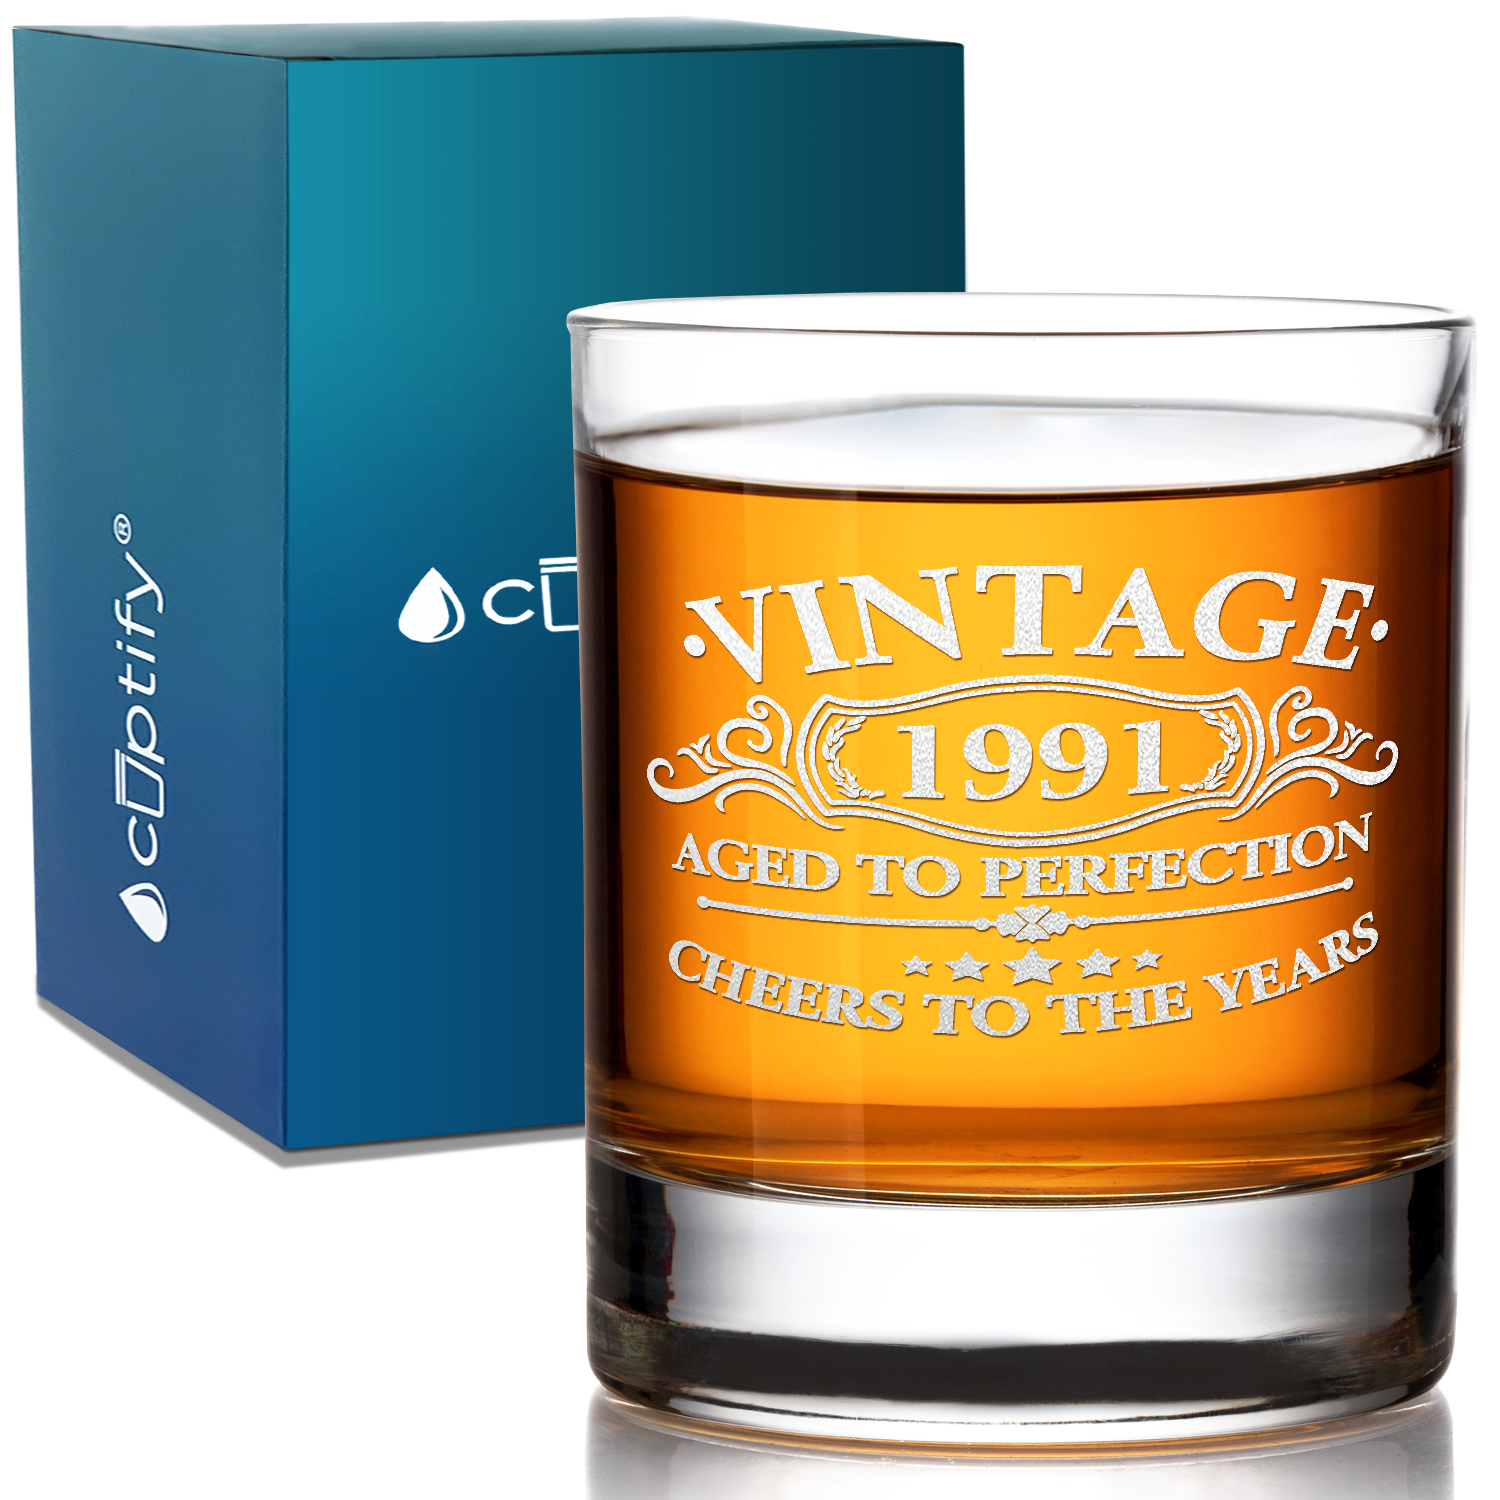 Vintage Aged To Perfection Cheers To 30 Years 1991 Laser Engraved on 10.25oz Old Fashion Glass